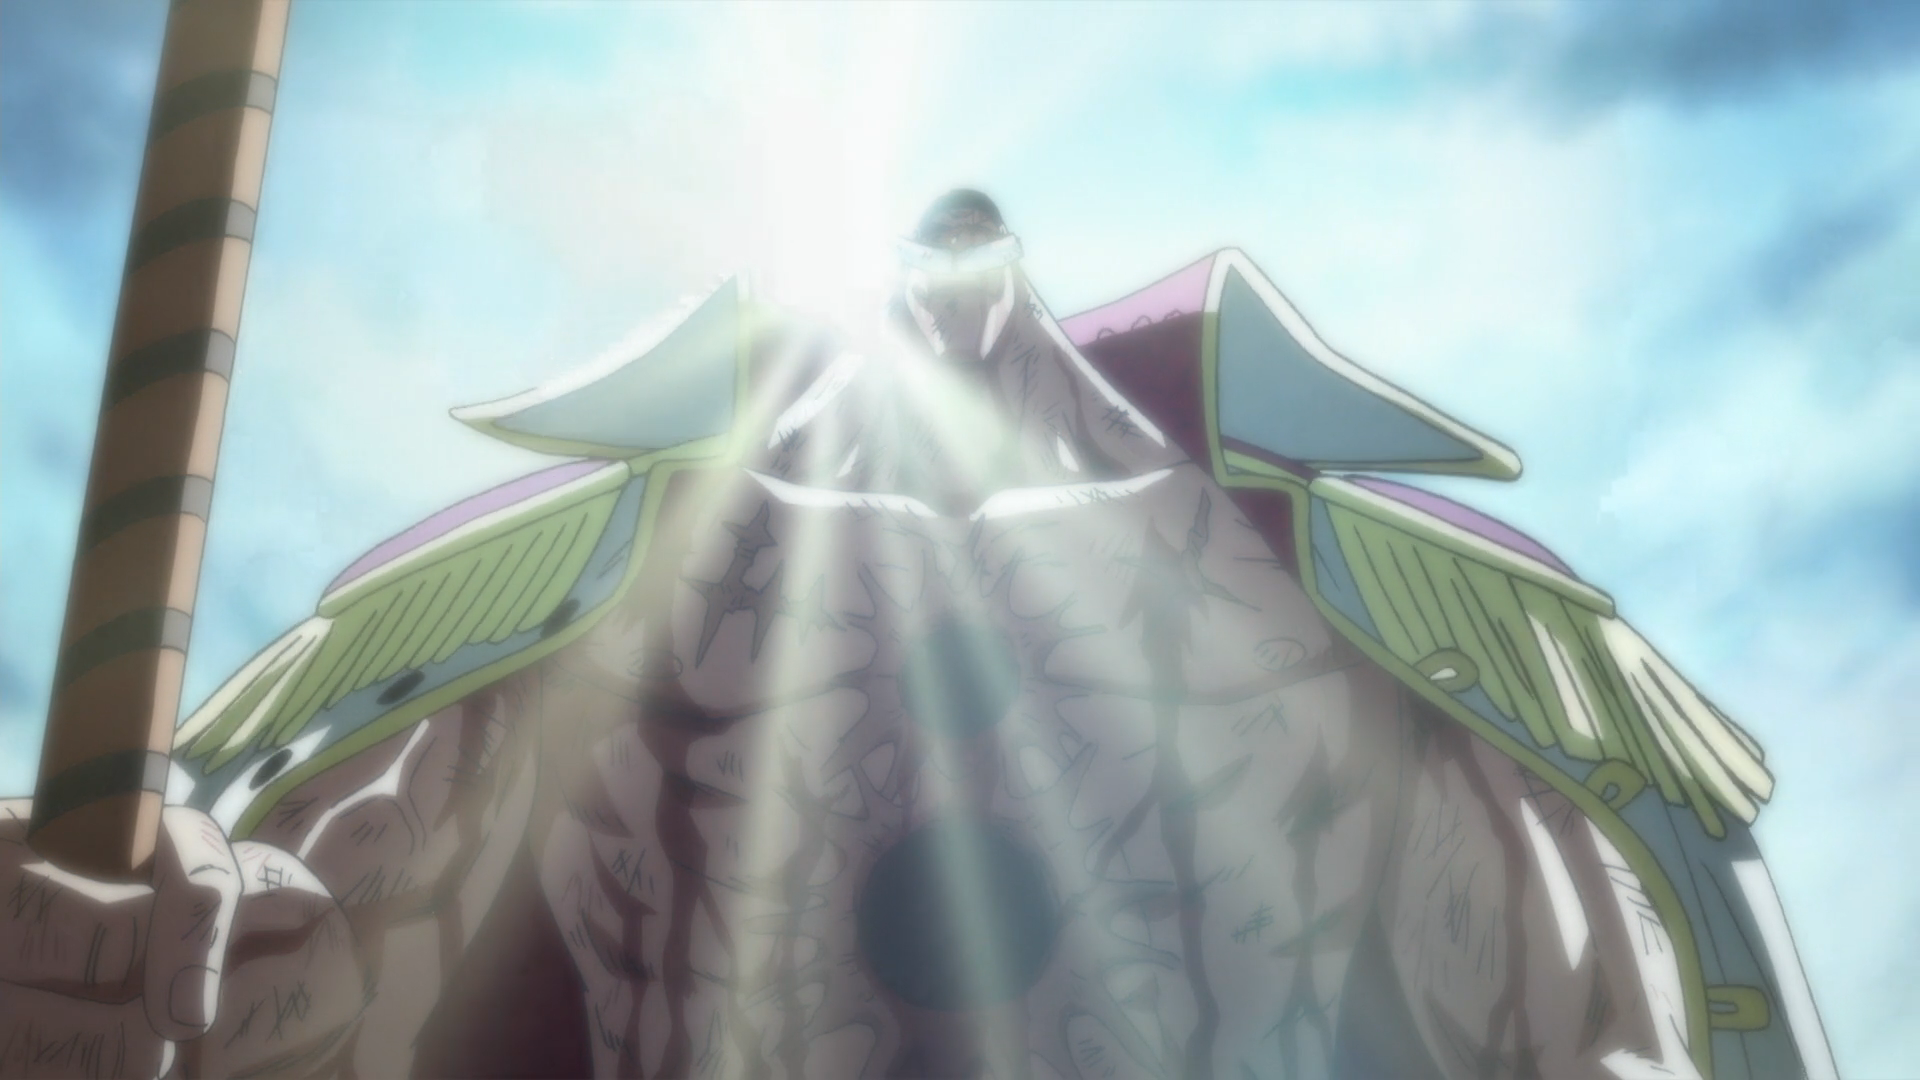 4 Reasons Why Whitebeard Death Was Incredibly Epic